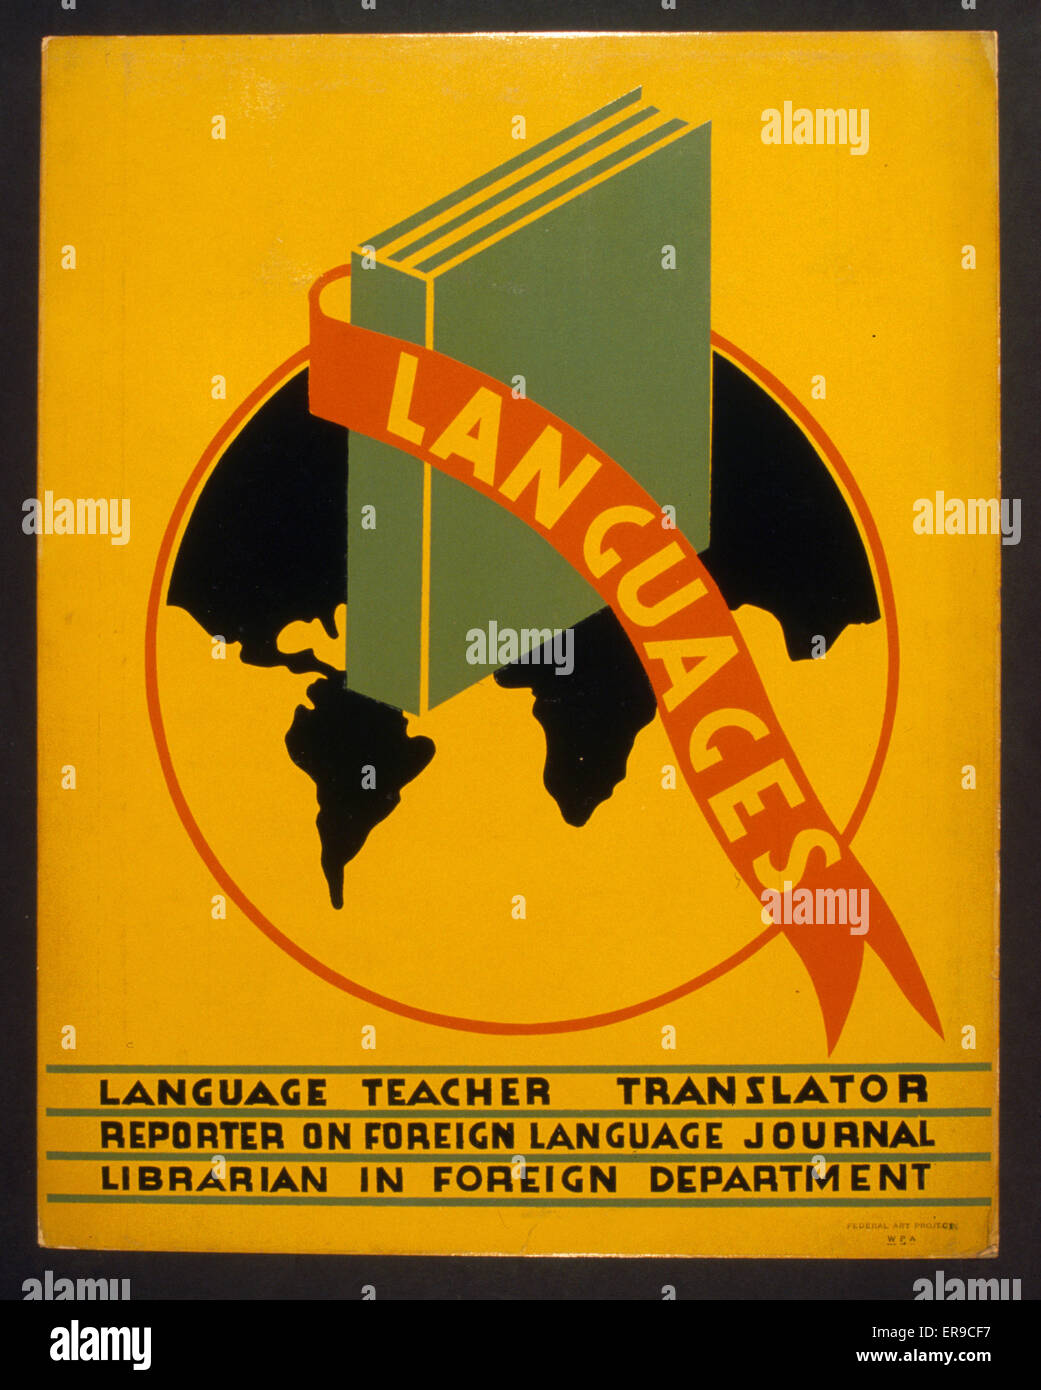 Languages. Poster promoting occupations in the field of languages, such as language teacher, translator, reporter on foreign language journal, and librarian in foreign department, showing book and globe. Date 1938. Stock Photo